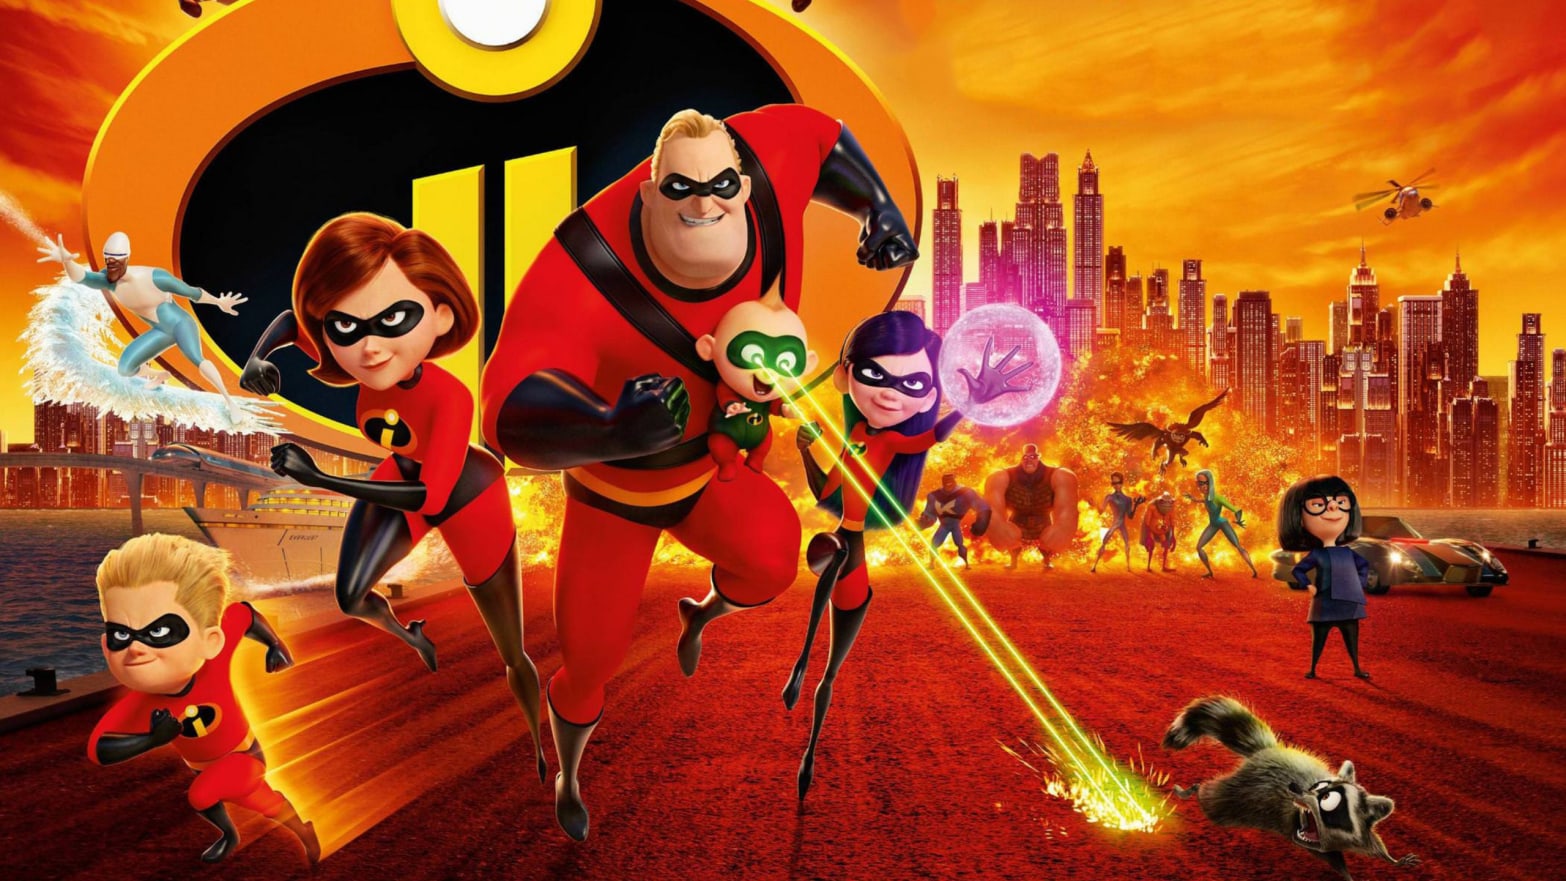 incredibles-2-is-an-action-packed-ode-to-parenthood-in-the-face-of-technology